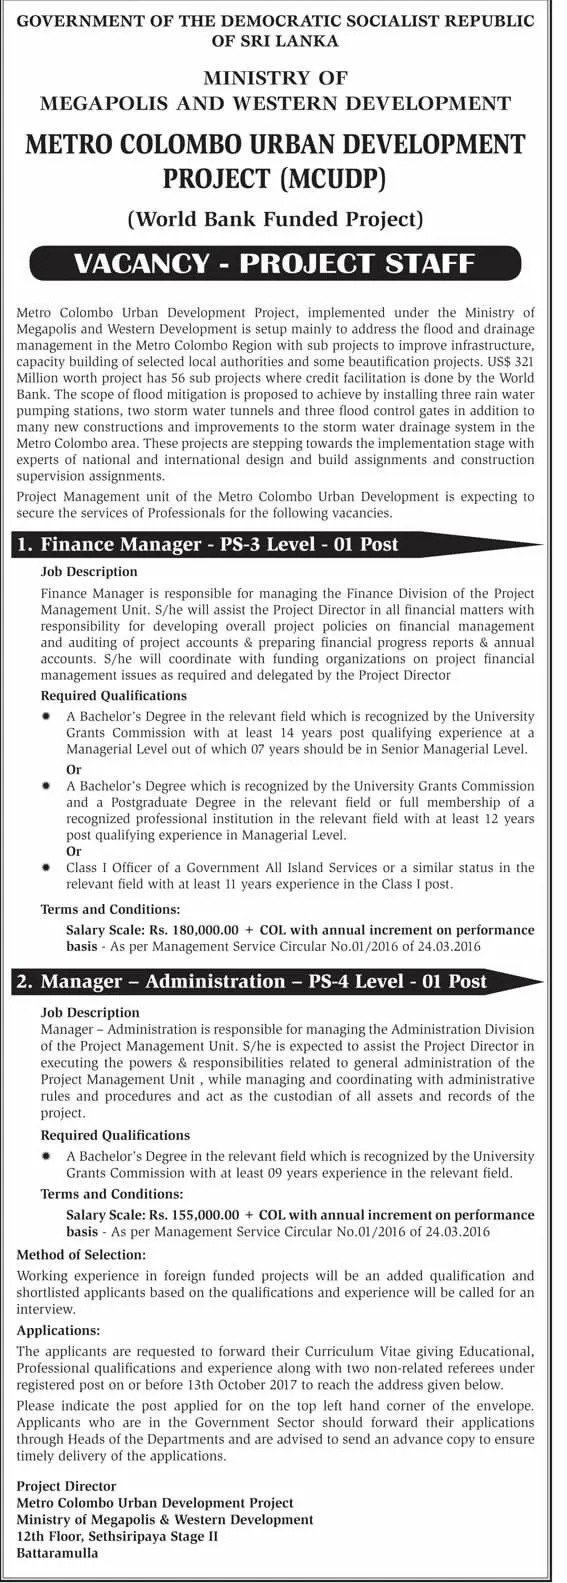 Manager Vacancy in Ministry of Megapolis & Western Development